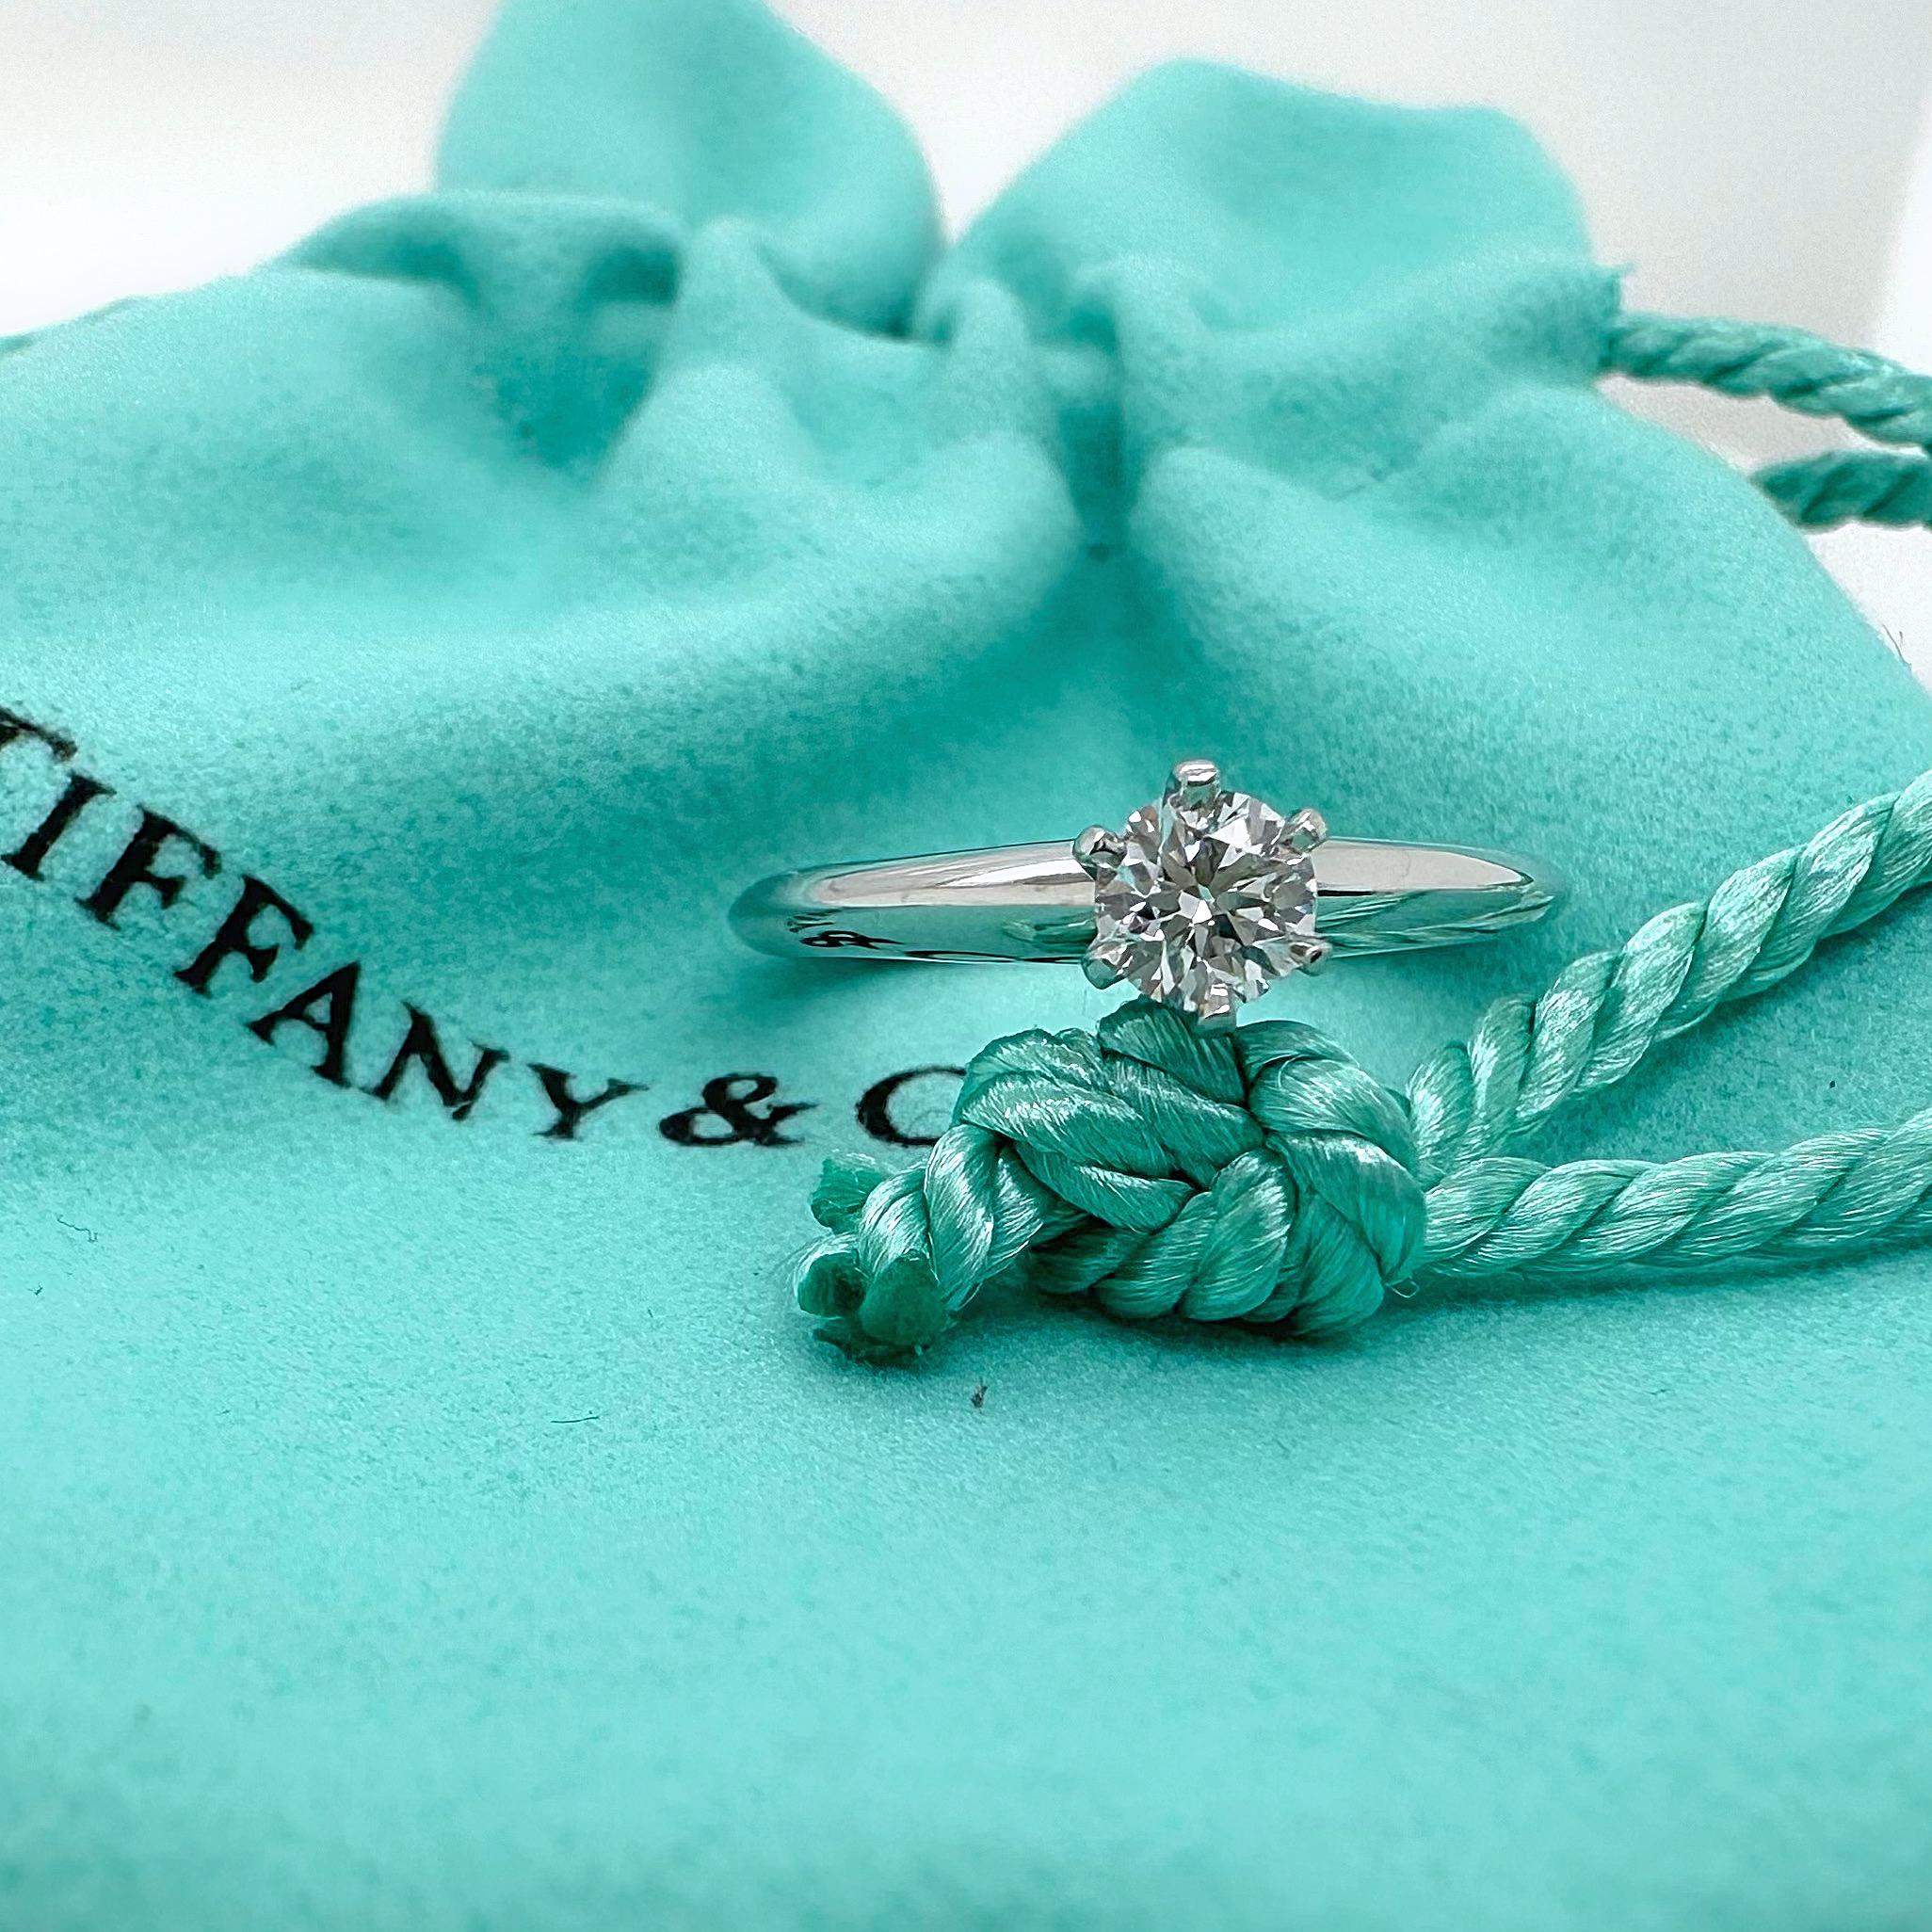 Tiffany & Co. Tiffany Setting Round Diamond Engagement Ring
Style:  Solitaire
Ref. number:  29062811
Metal:  Platinum
Size:  4.5 sizable
Measurements:  2 mm
Main Diamond:  0.25 cts
Color & Clarity:  E, VS1
Hallmark:  ©TIFFANY&CO. PT950 29062811